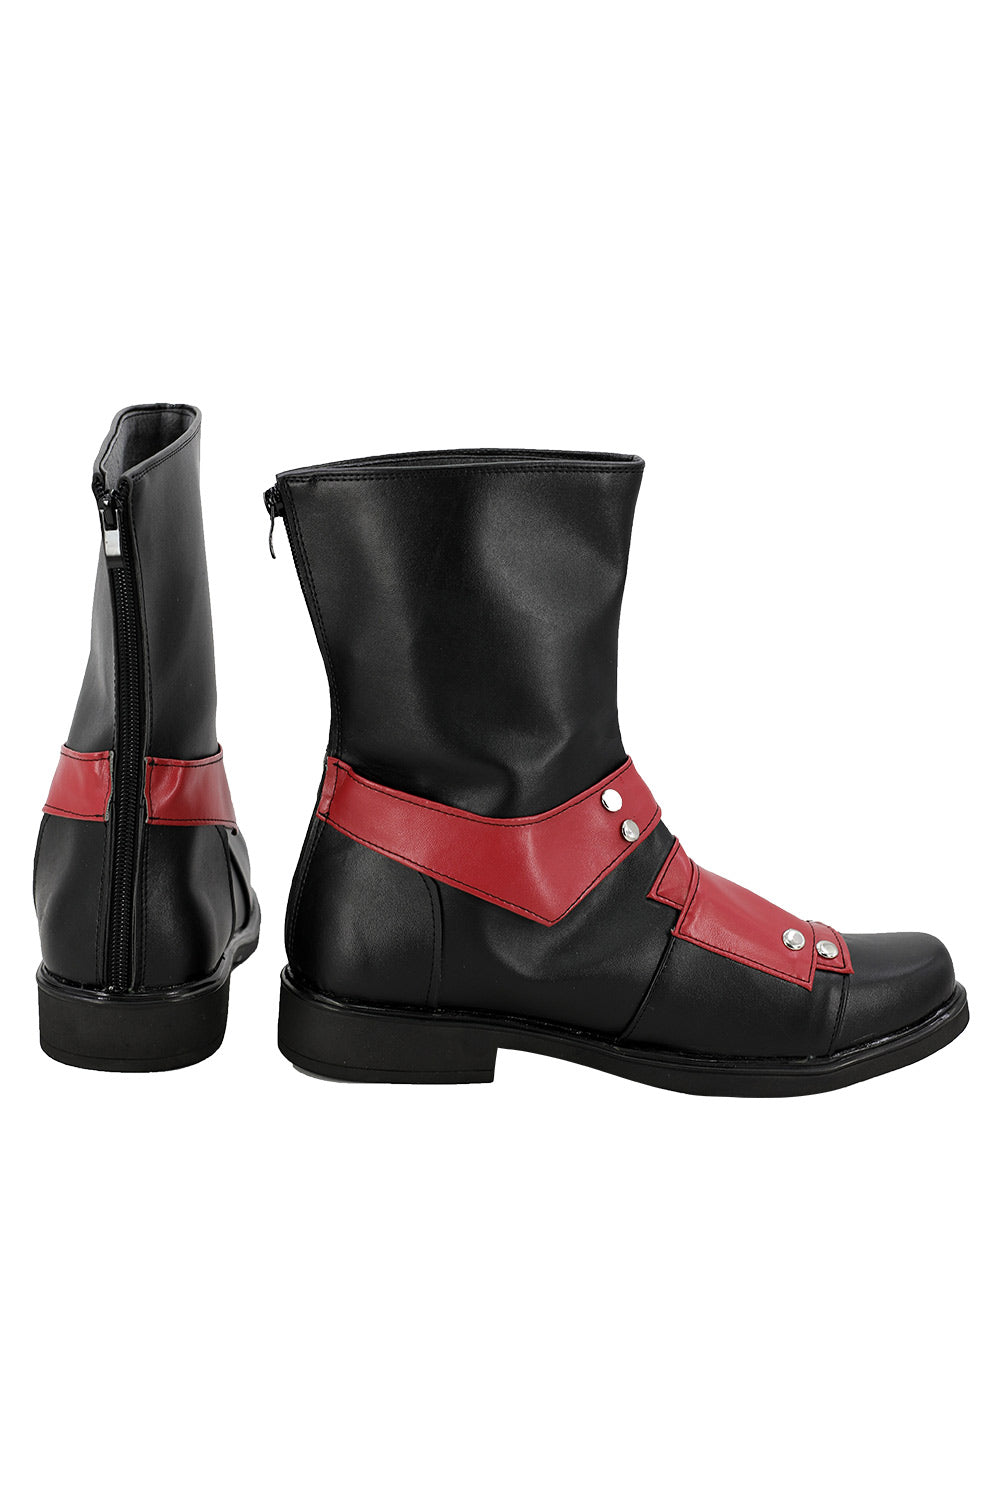 Deadpool Wade Wilson Bottes Cosplay Chaussures